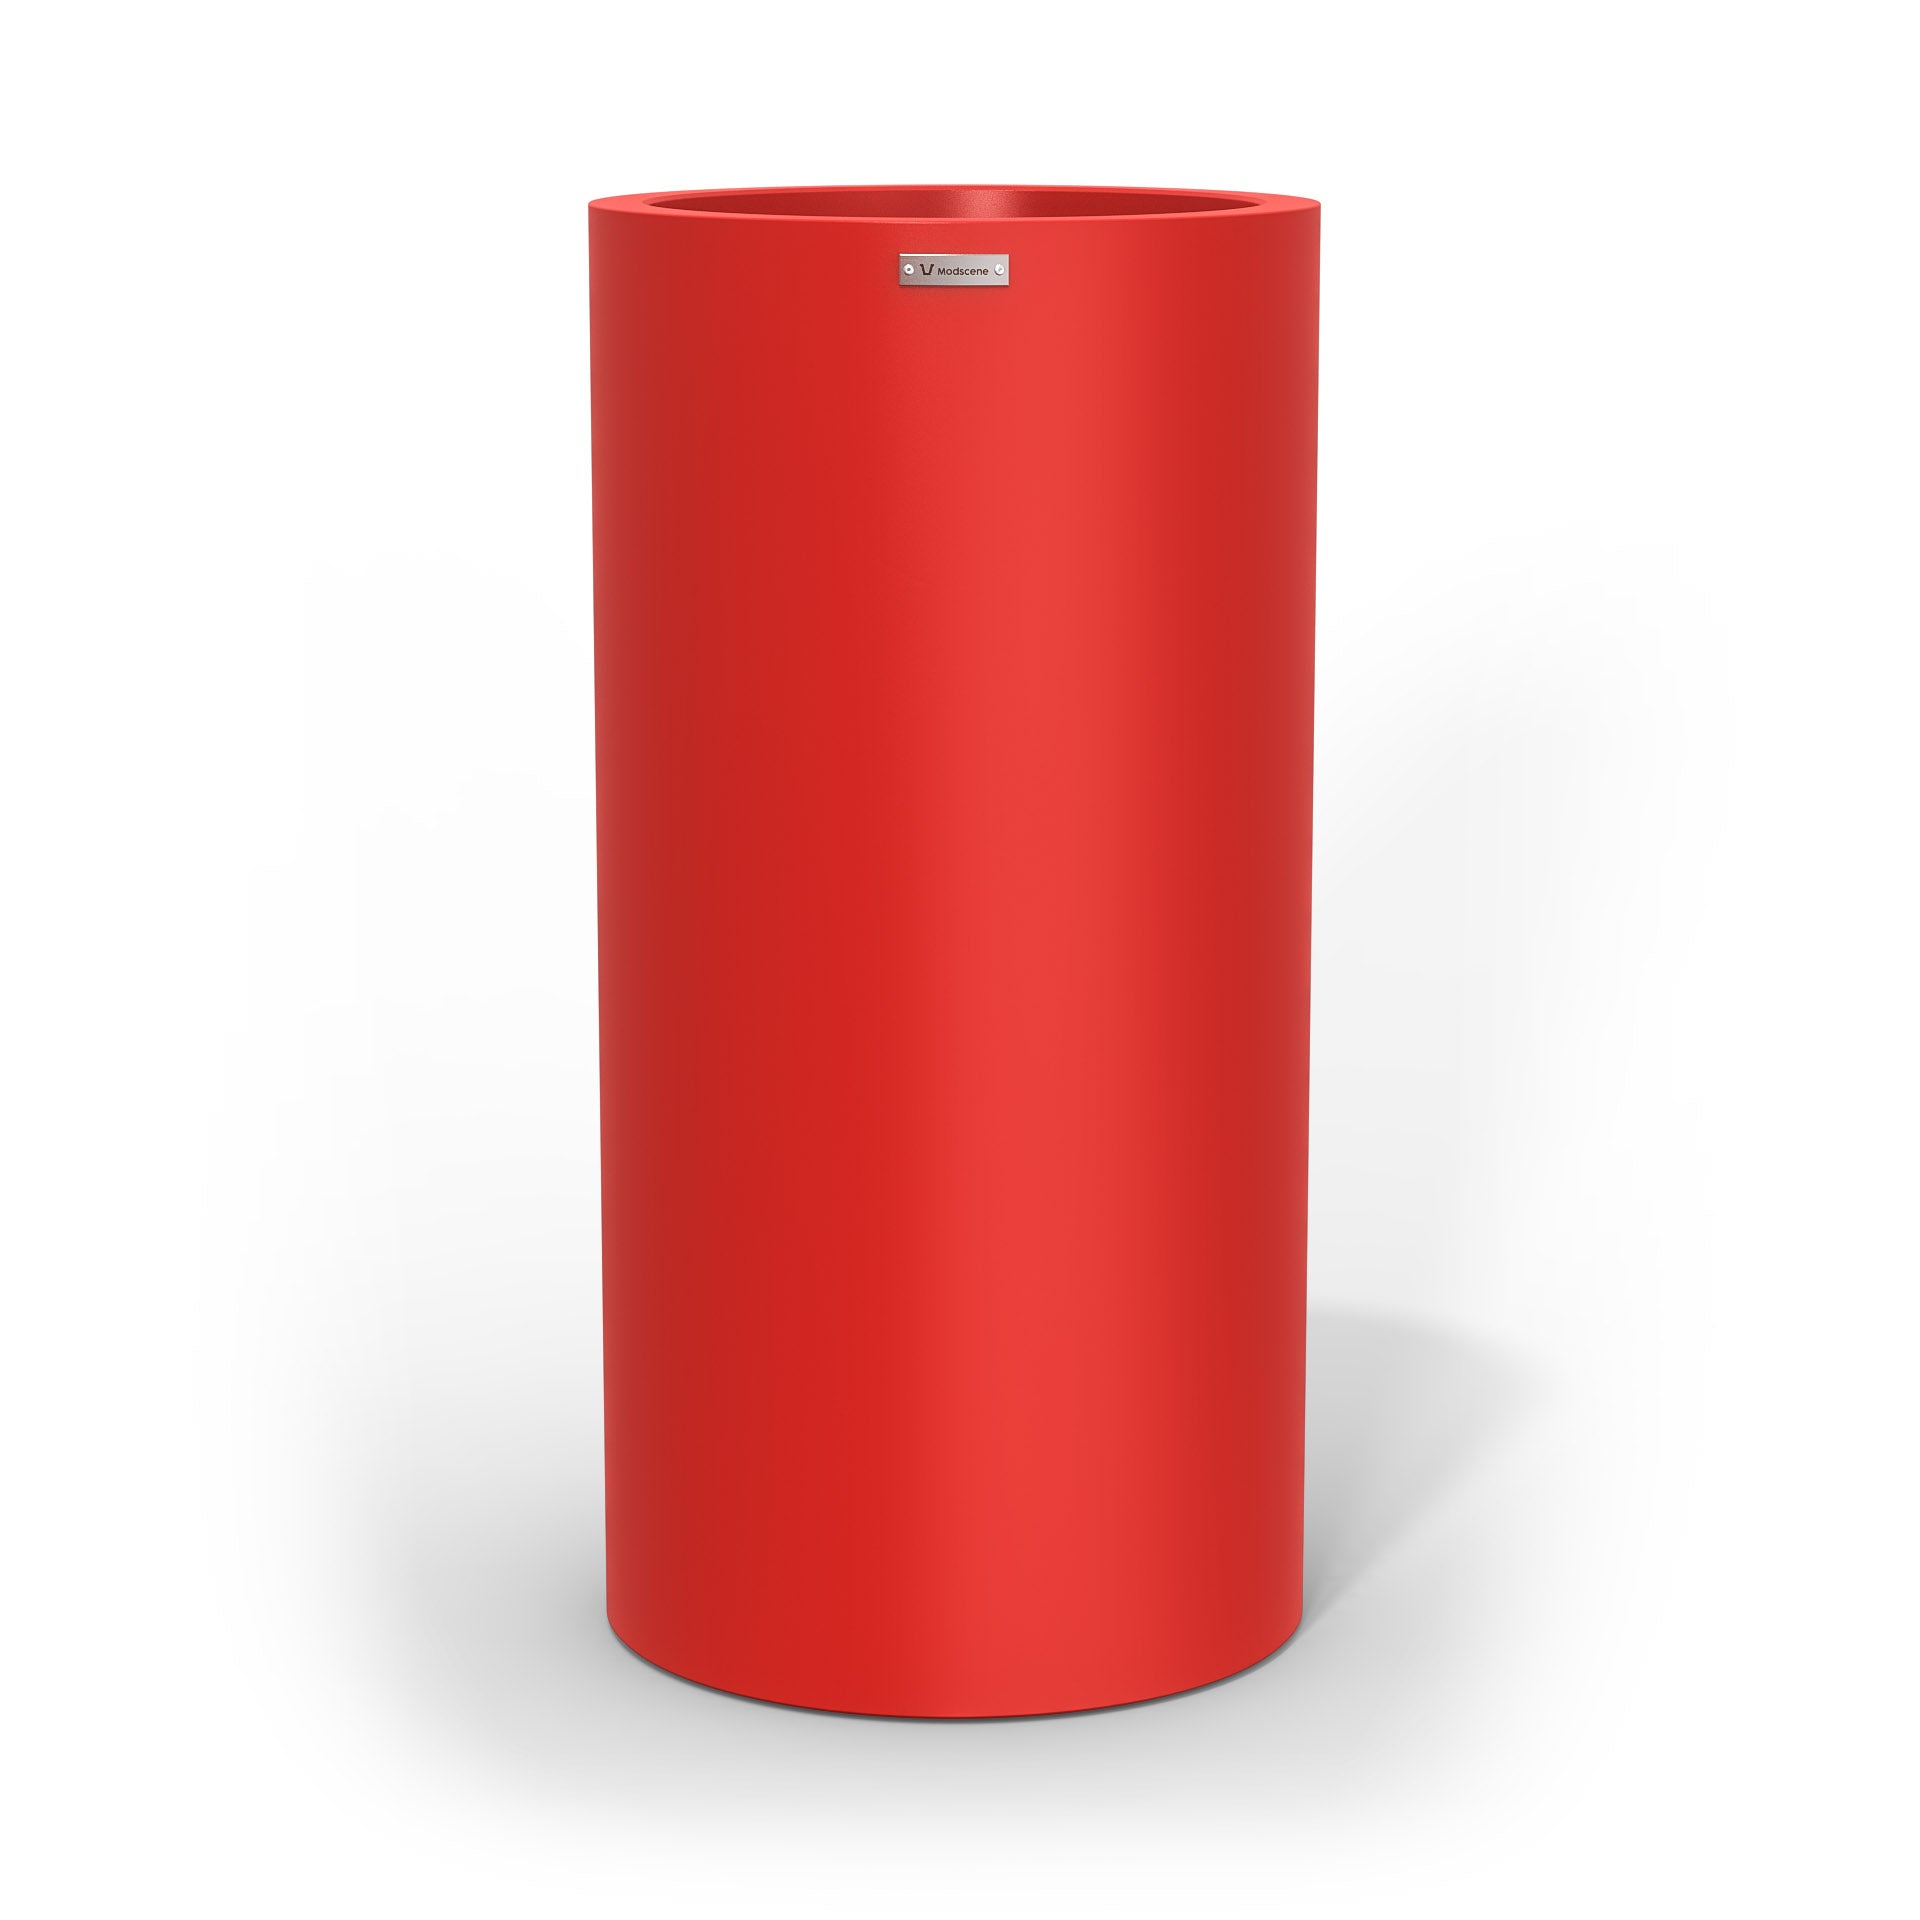 A tall cylinder planter pot in red made by Modscene New Zealand.